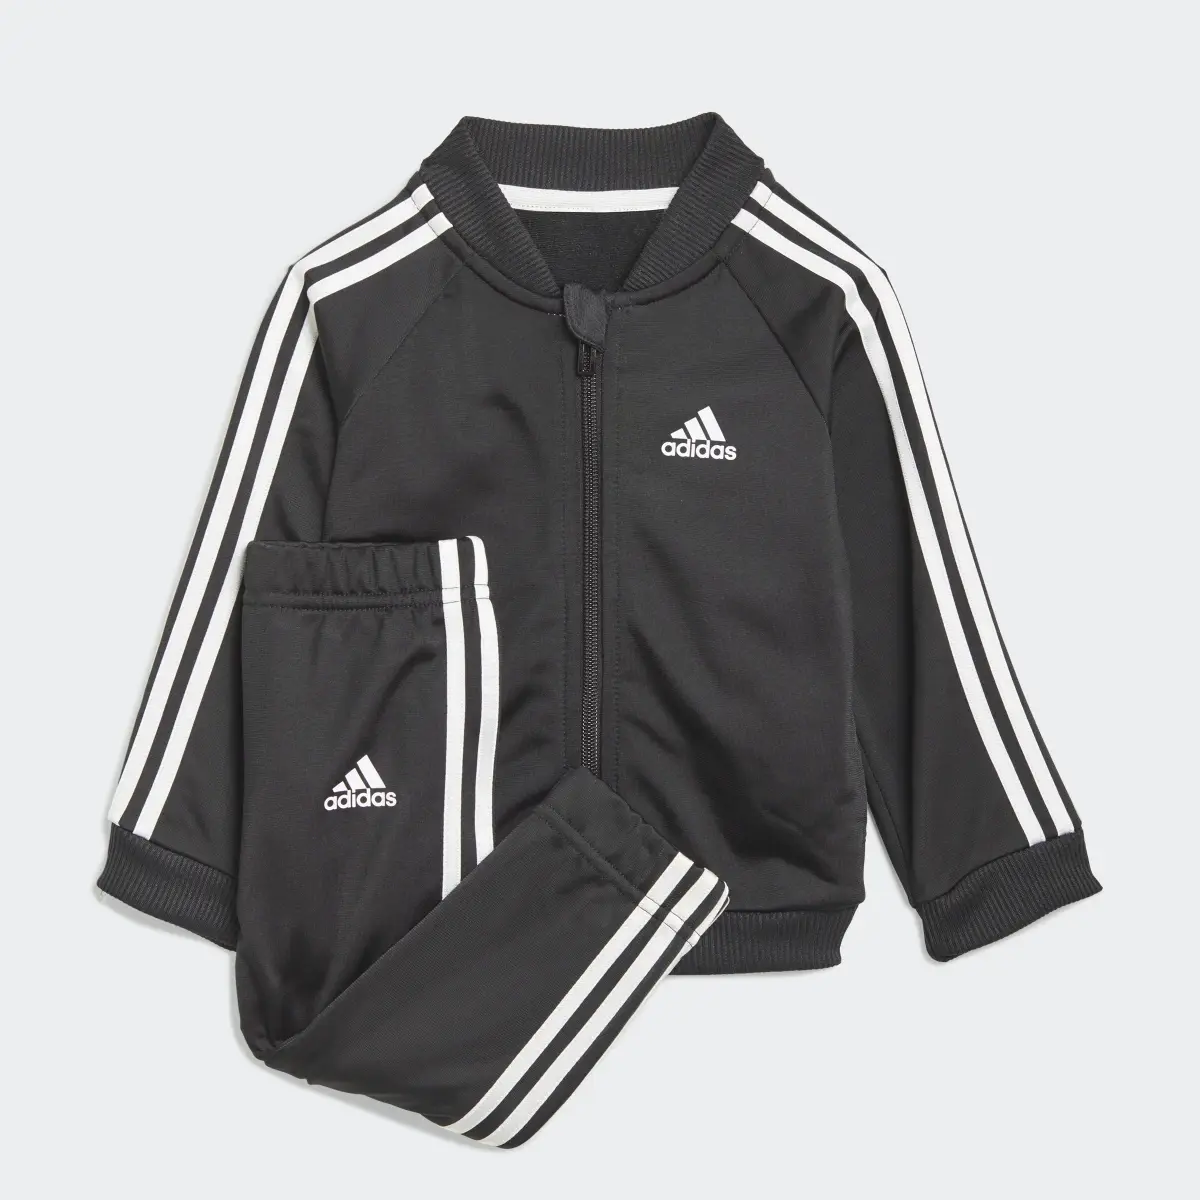 Adidas 3-Stripes Tricot Track Suit. 1